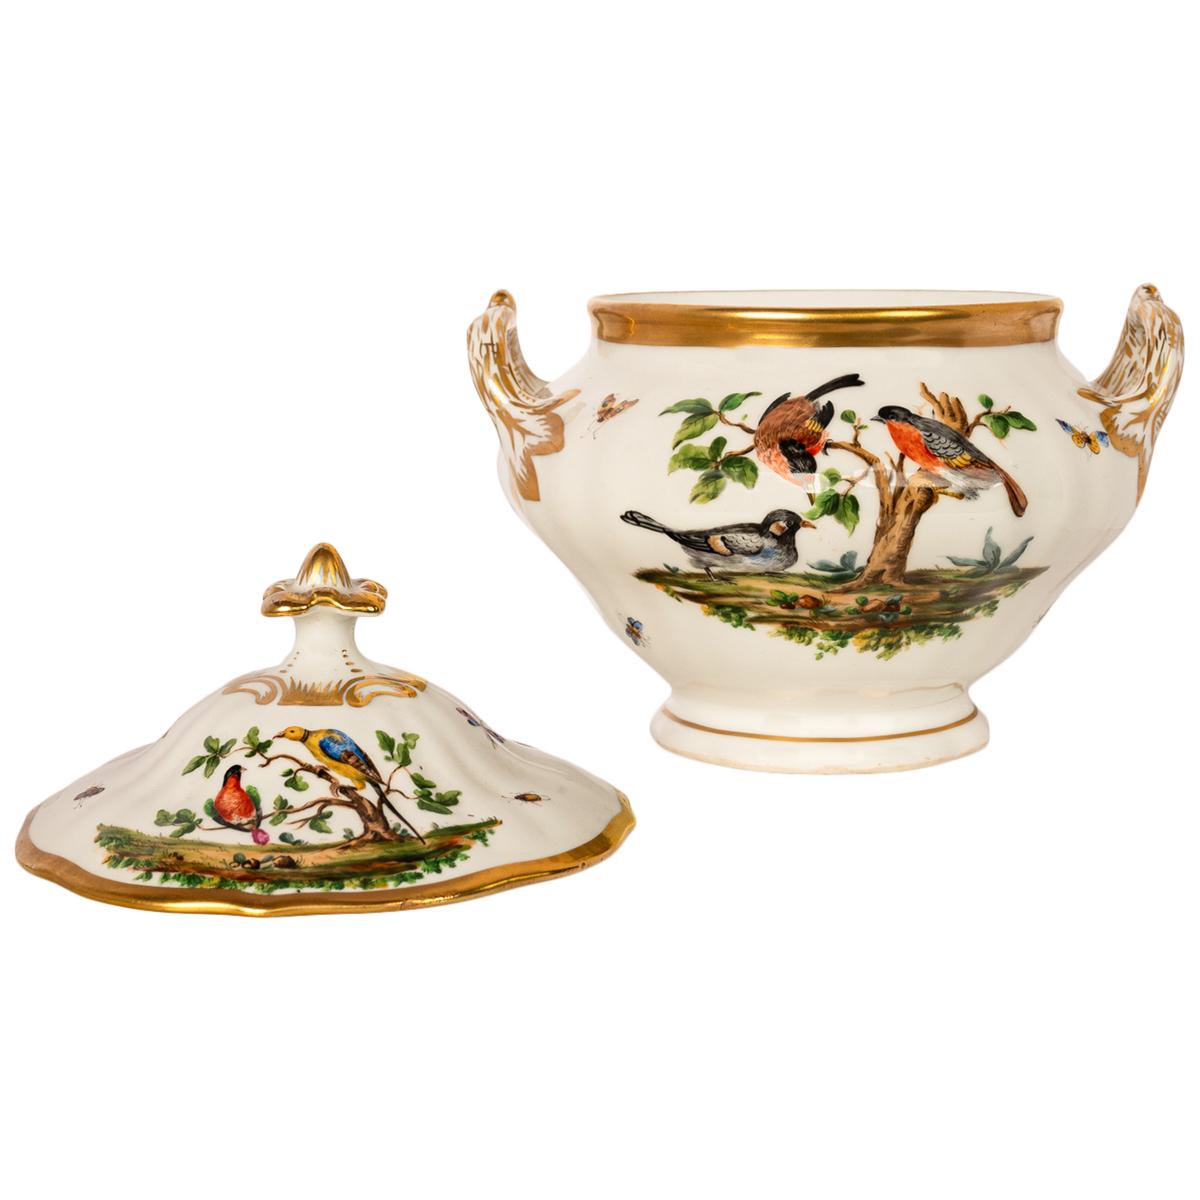 Antique 19th Century German KPM Porcelain Lidded Bowl Tureen Birds Butterflies In Good Condition For Sale In Portland, OR